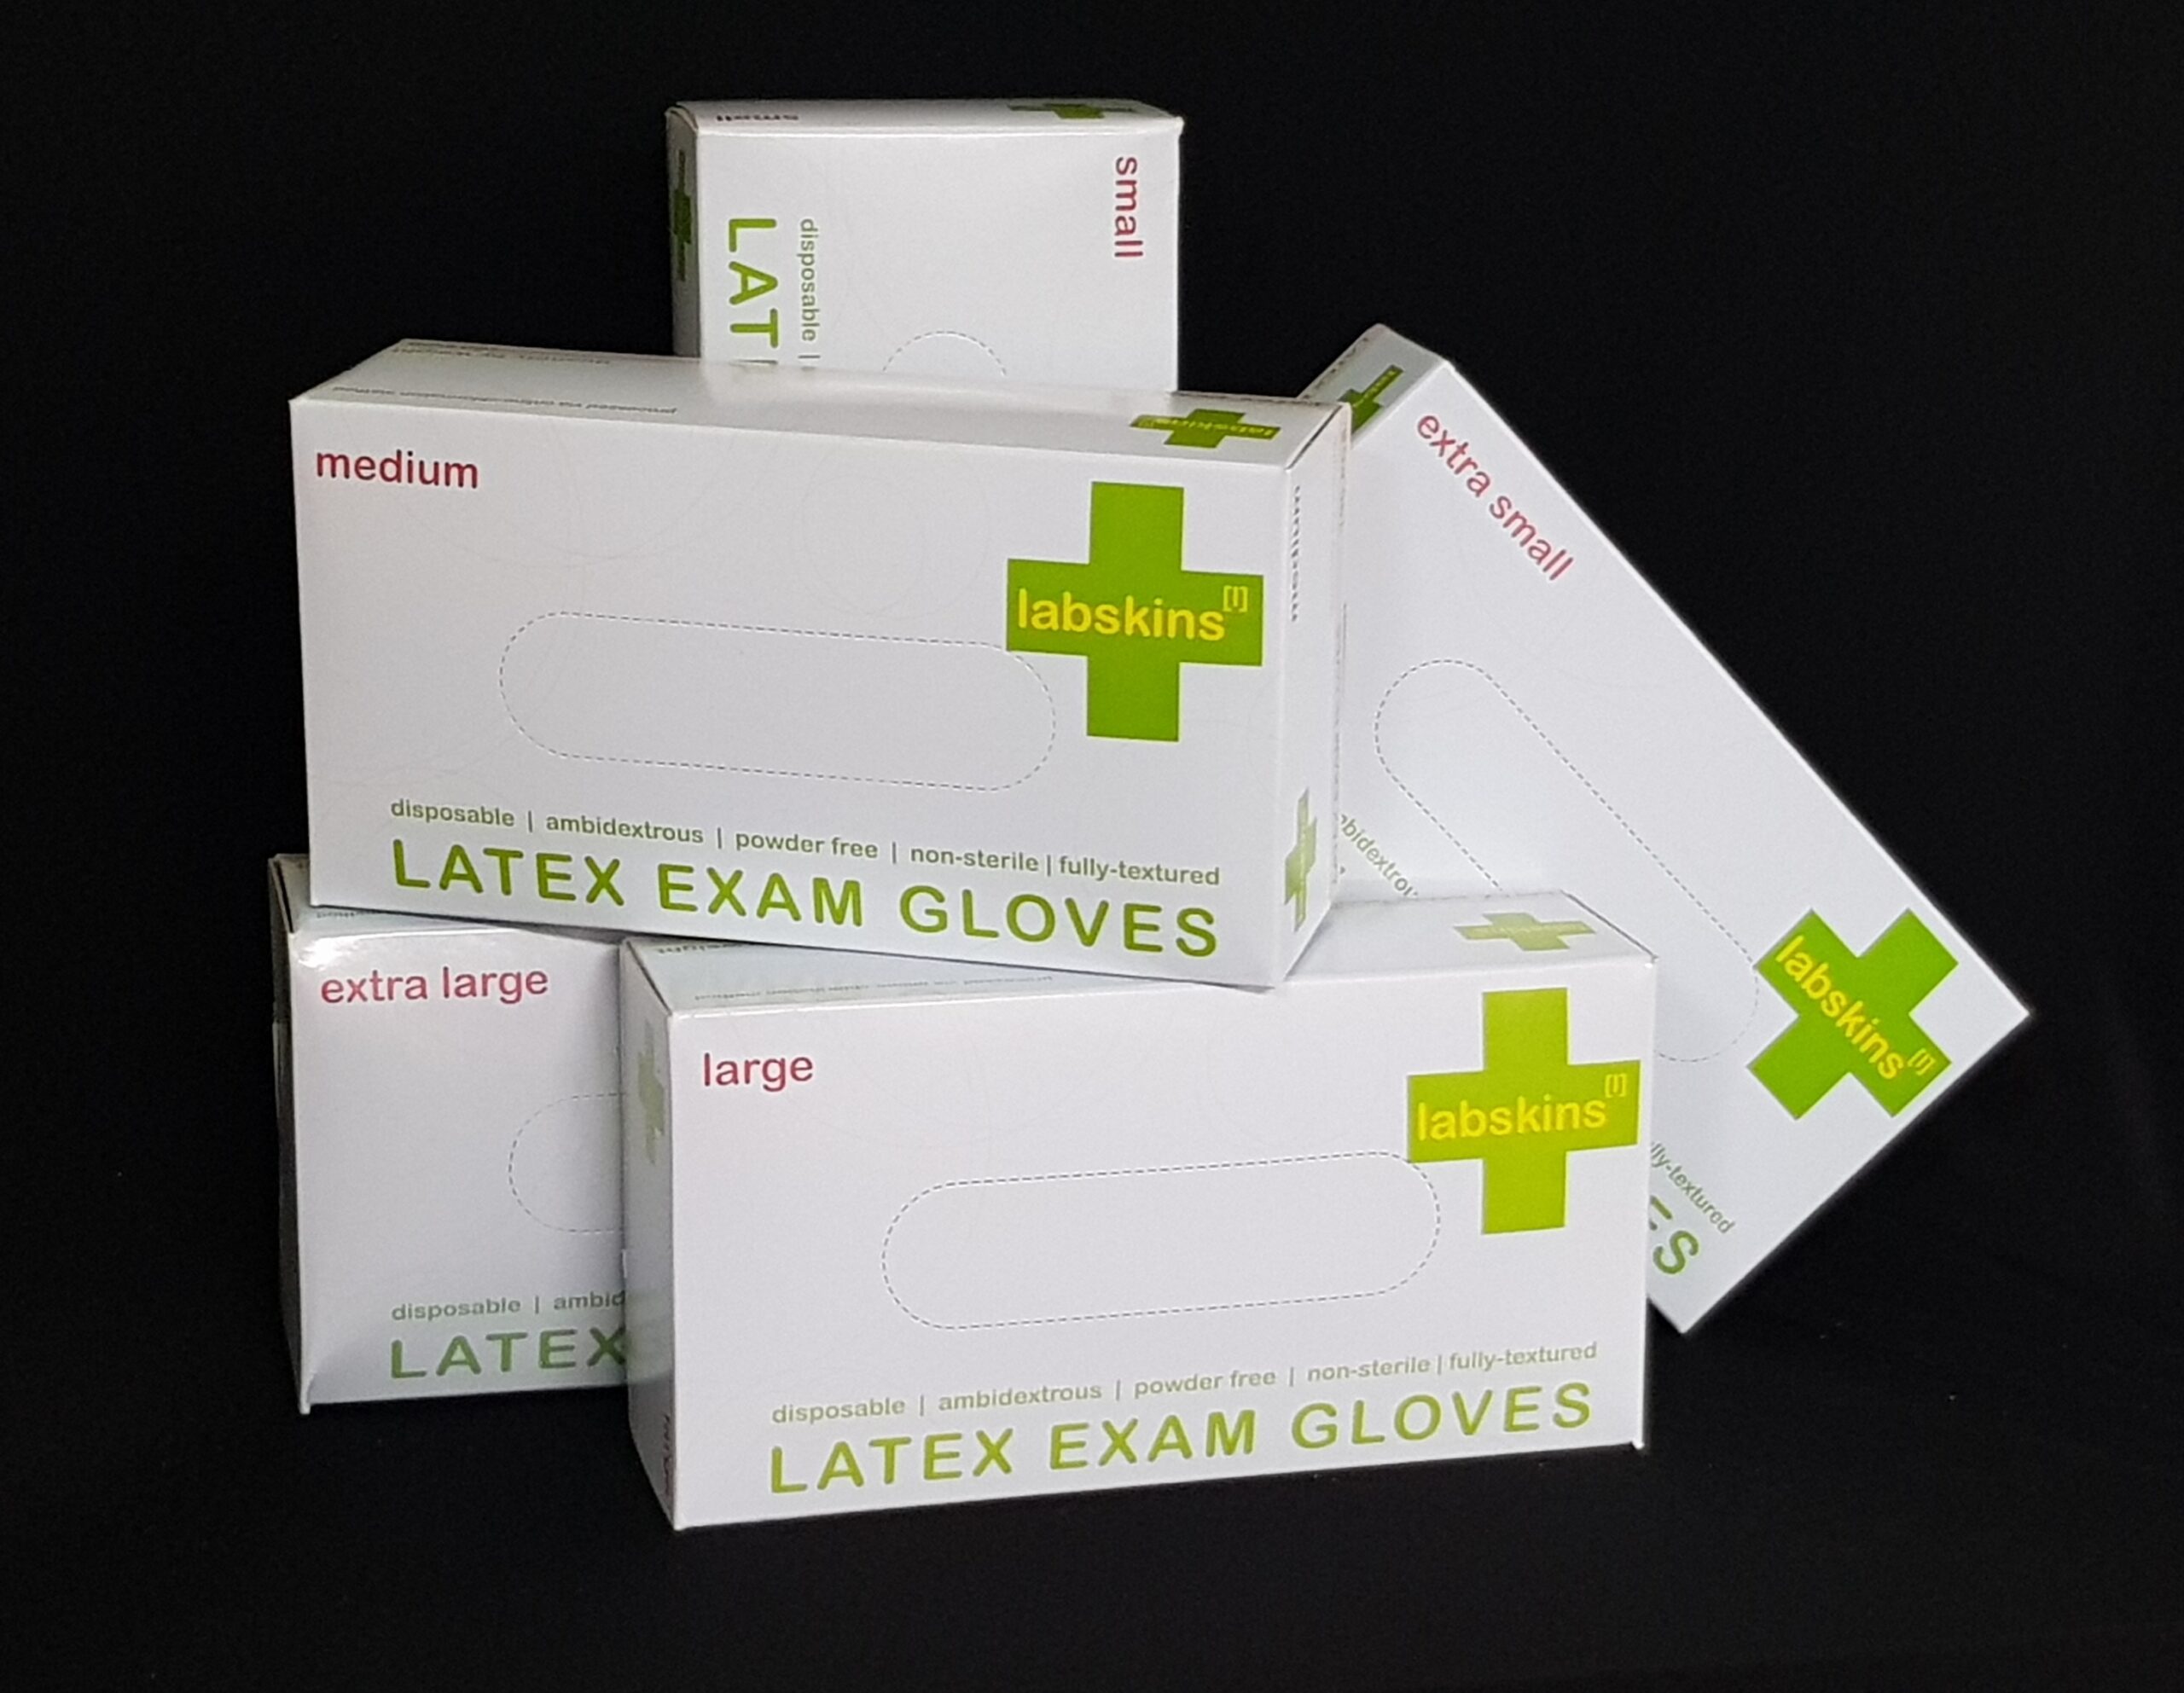 Labskins Disposable Latex Gloves